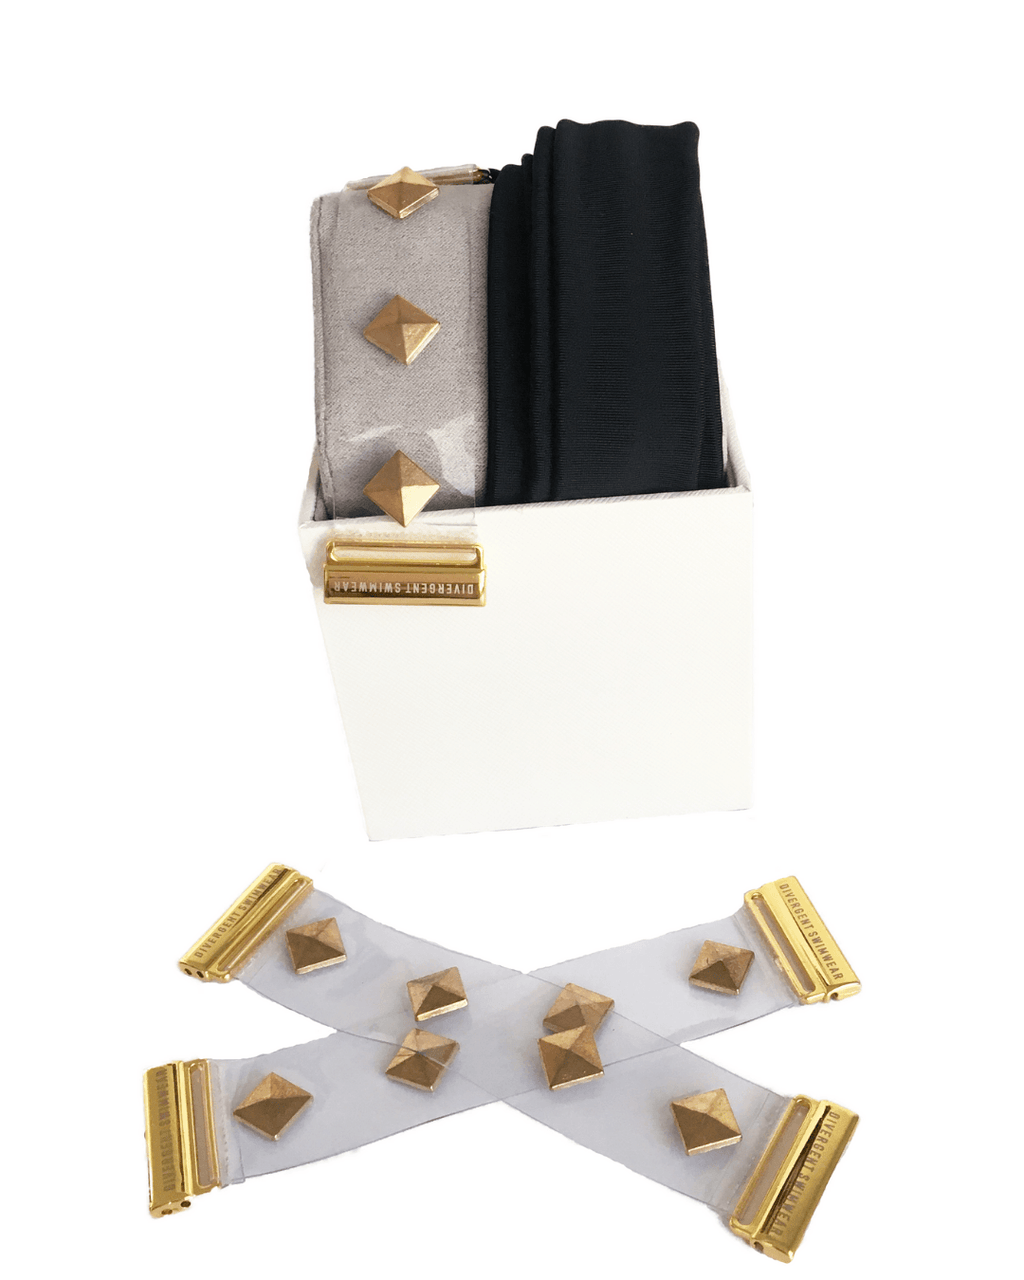 Black interchangeable bikini straps with gold pyramid studs and gold clasps | Divergent Swimwear